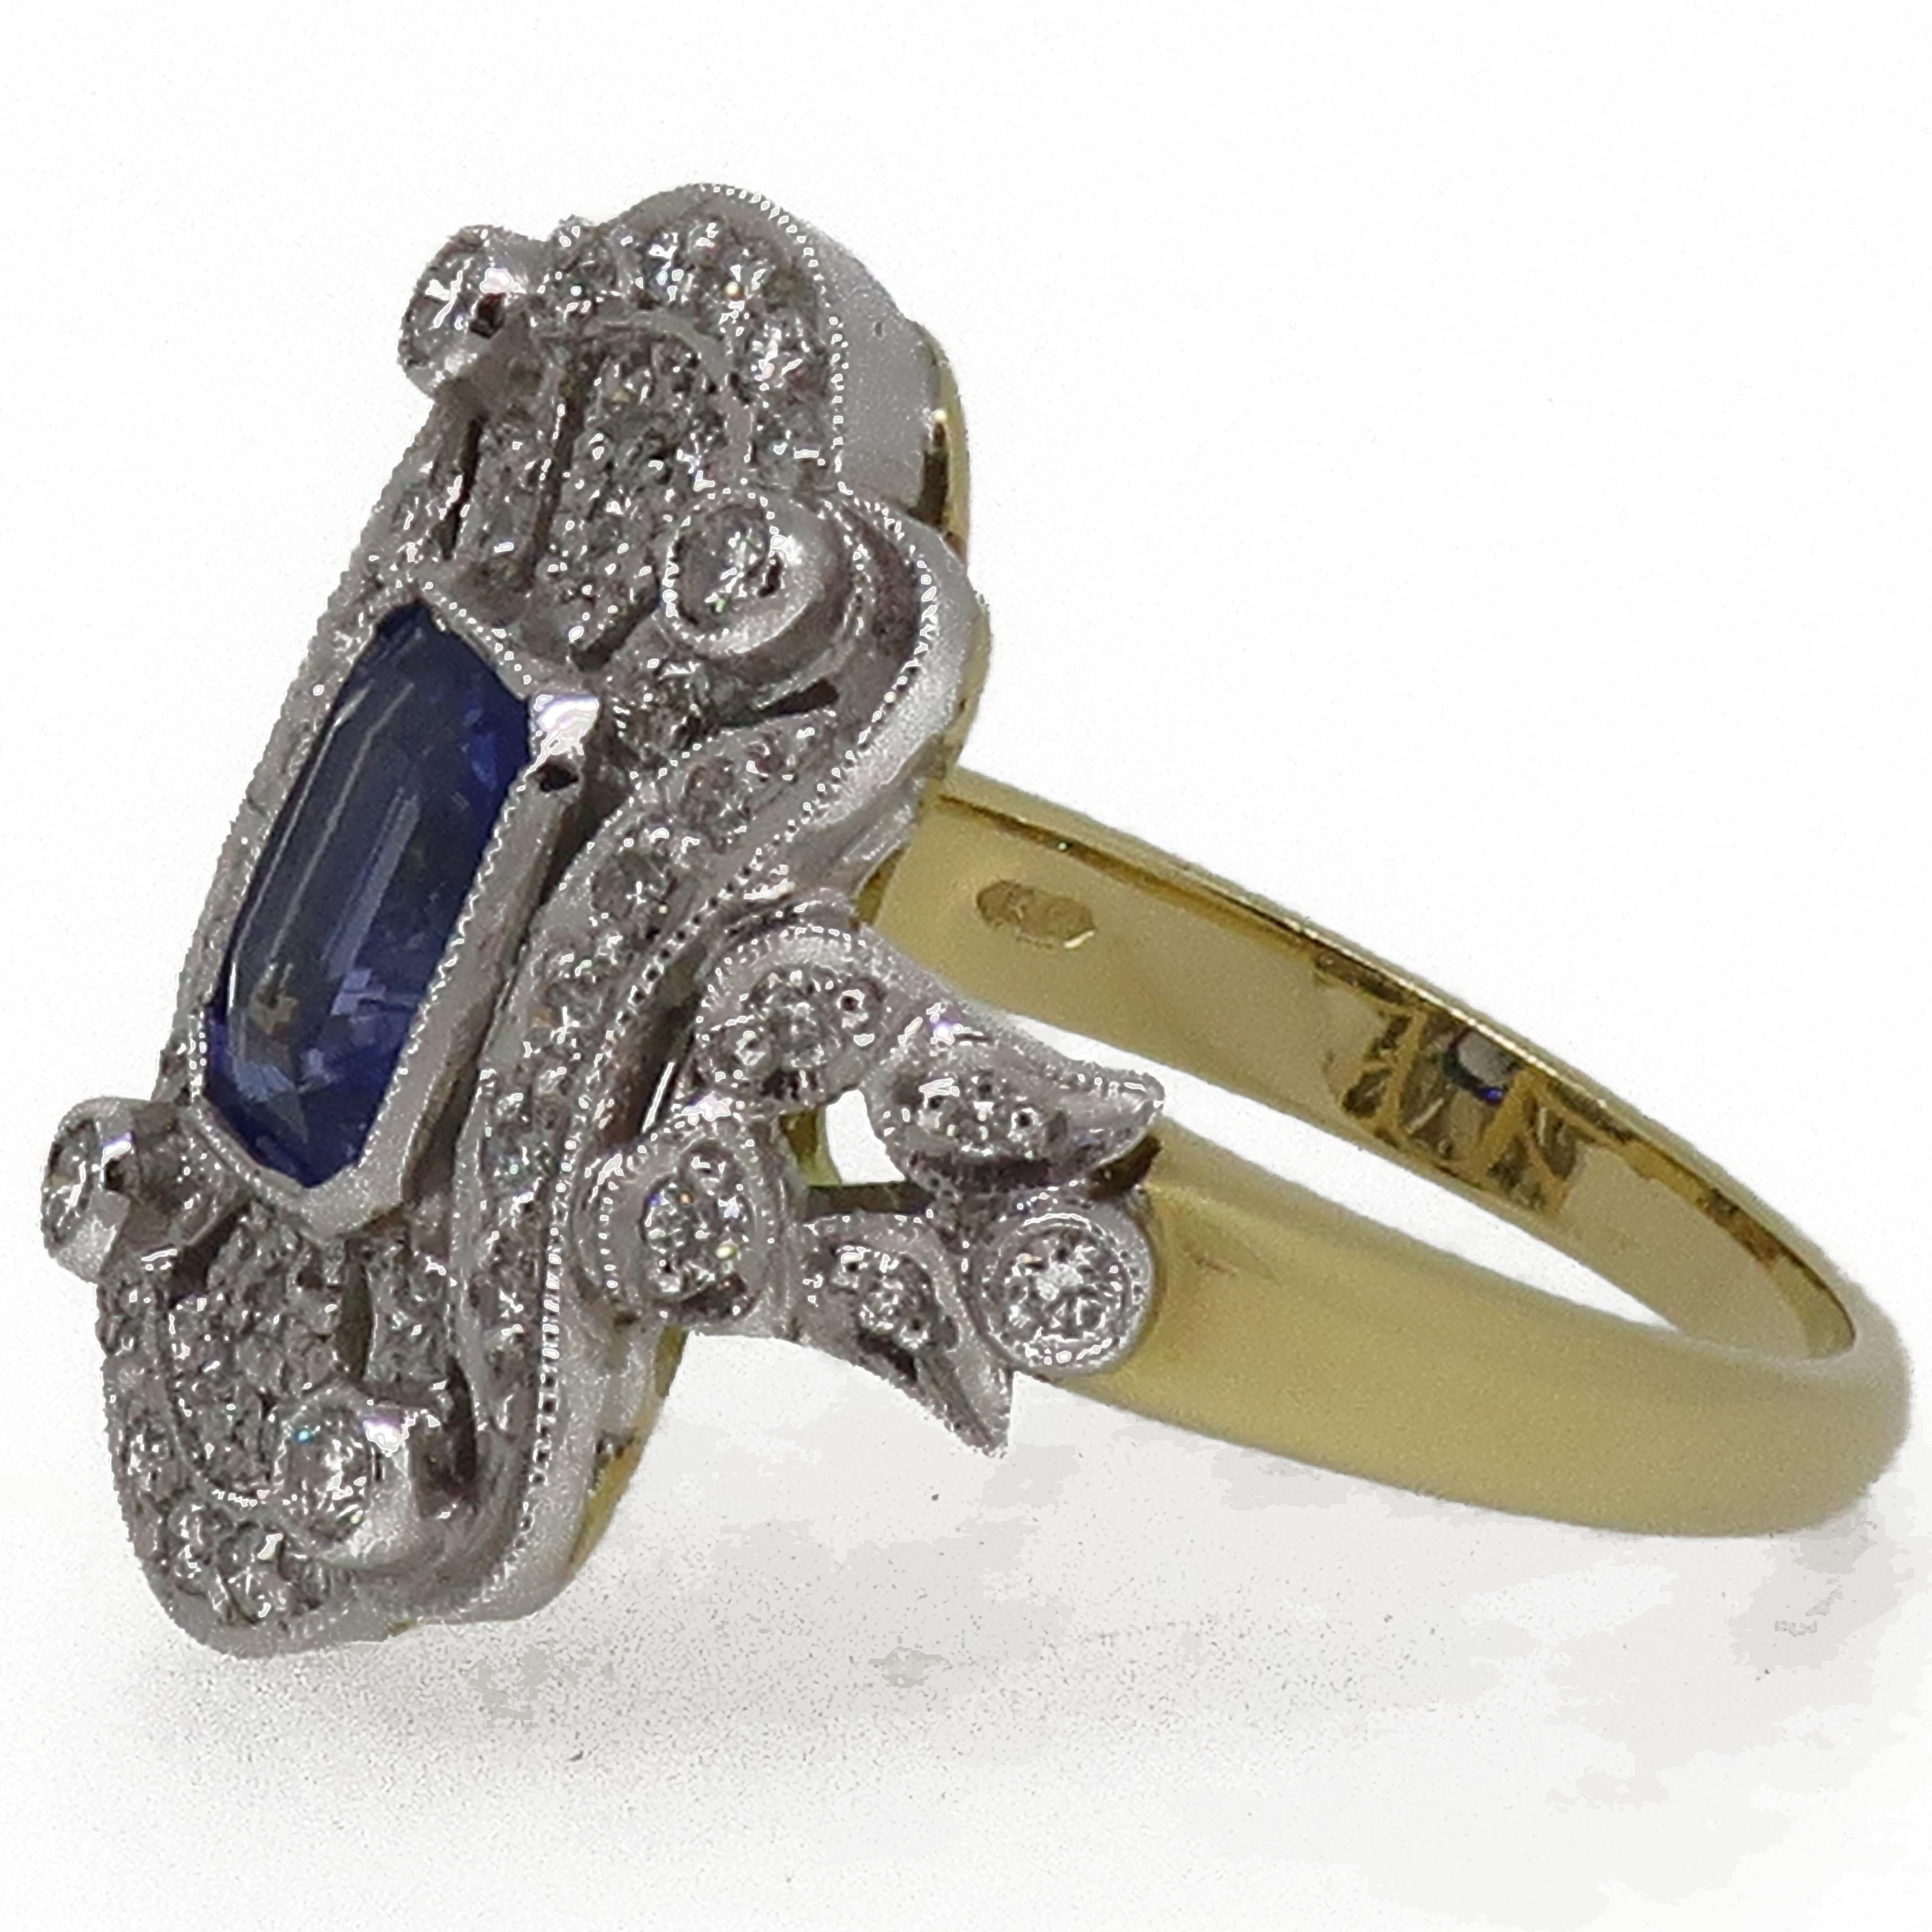 18 Karat Gold Emerald Cut Sapphire & Diamond Art Deco Style Cluster Ring

A stand out elaborate blue emerald cut sapphire ring, sapphire weighing 1.50ct. This ring consists of central blue sapphire with an elaborate design of small white brilliant